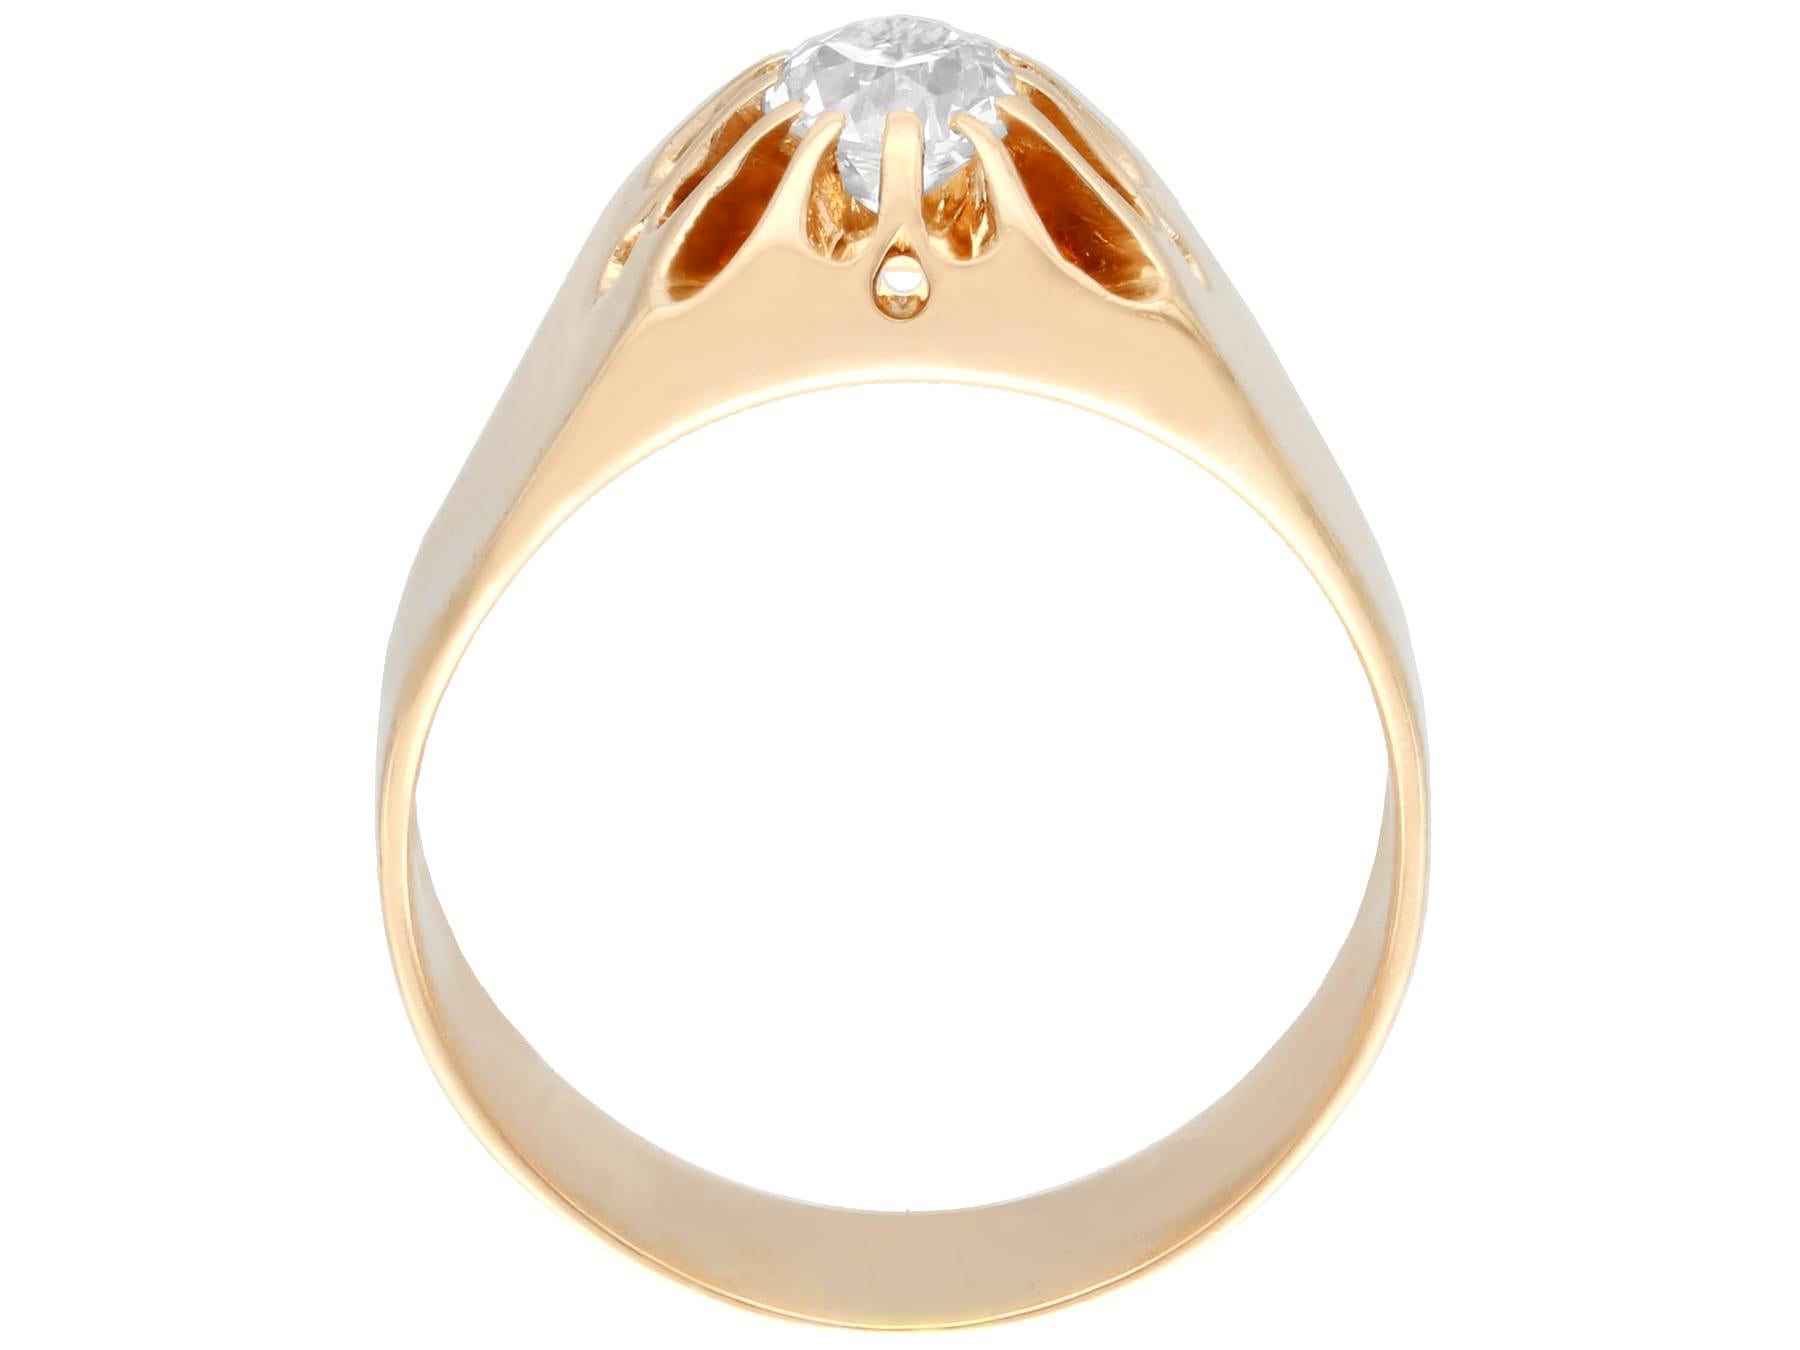 Antique 1920s Diamond and Rose Gold Solitaire Ring In Excellent Condition For Sale In Jesmond, Newcastle Upon Tyne